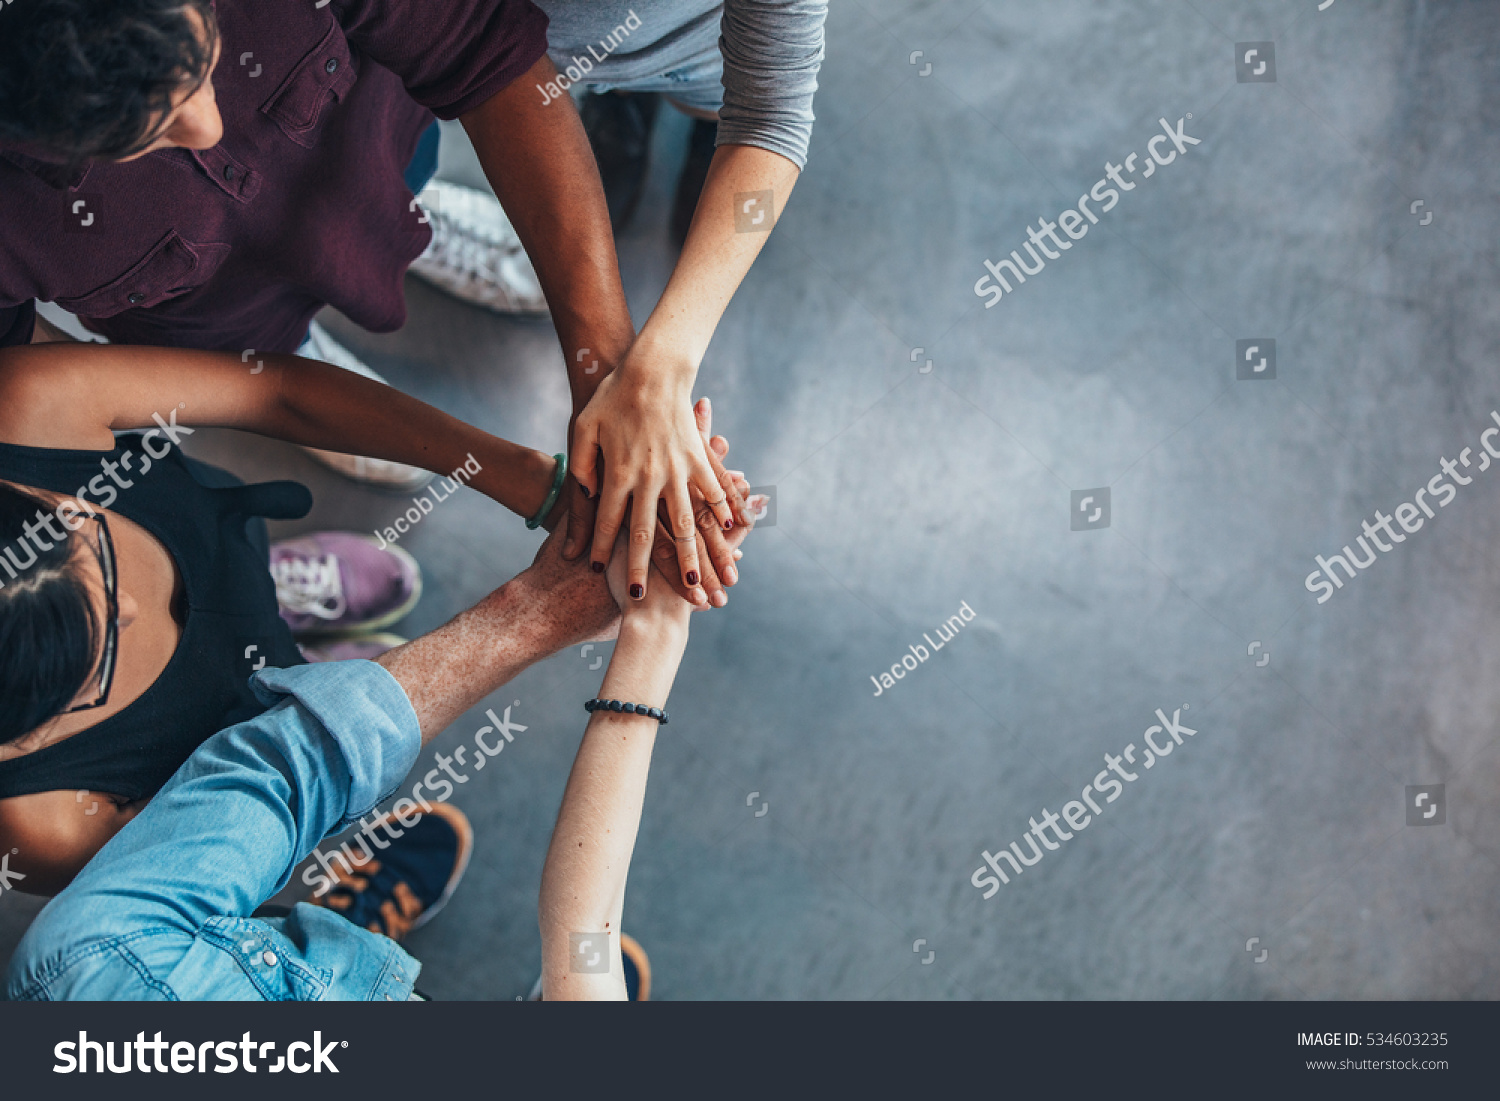 Top view image of group of young people putting their hands together. Friends with stack of hands showing unity. #534603235